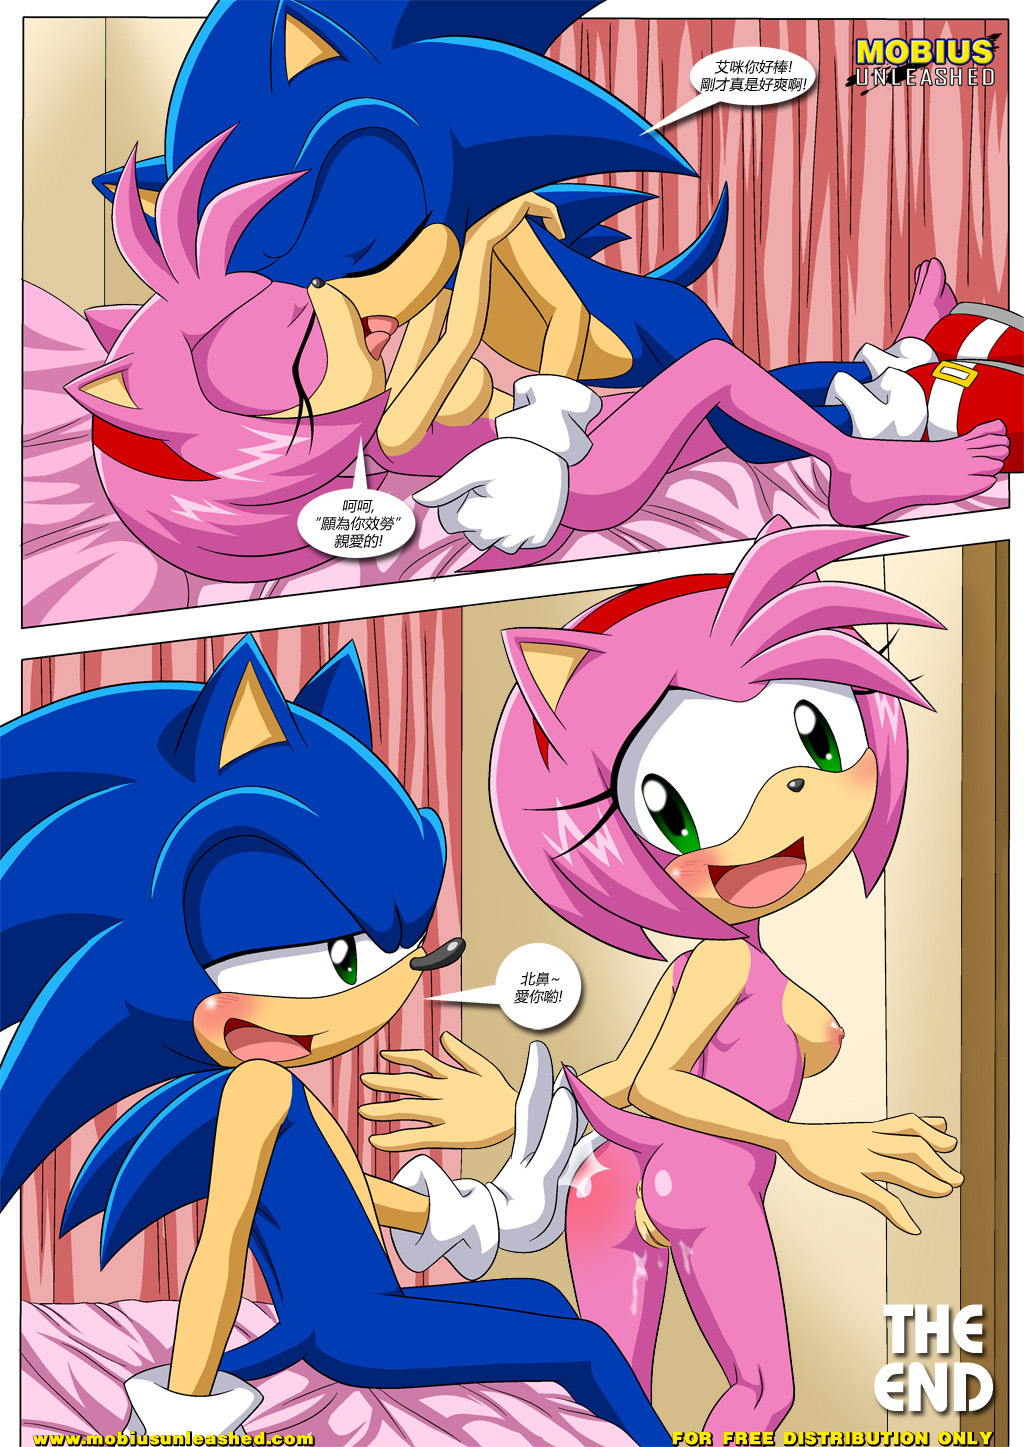 [Palcomix] Date Night ....without the Date (Sonic The Hedgehog) [Chinese] [里界漢化組] [Palcomix] Date Night ....without the Date (Sonic The Hedgehog) [中国翻訳]